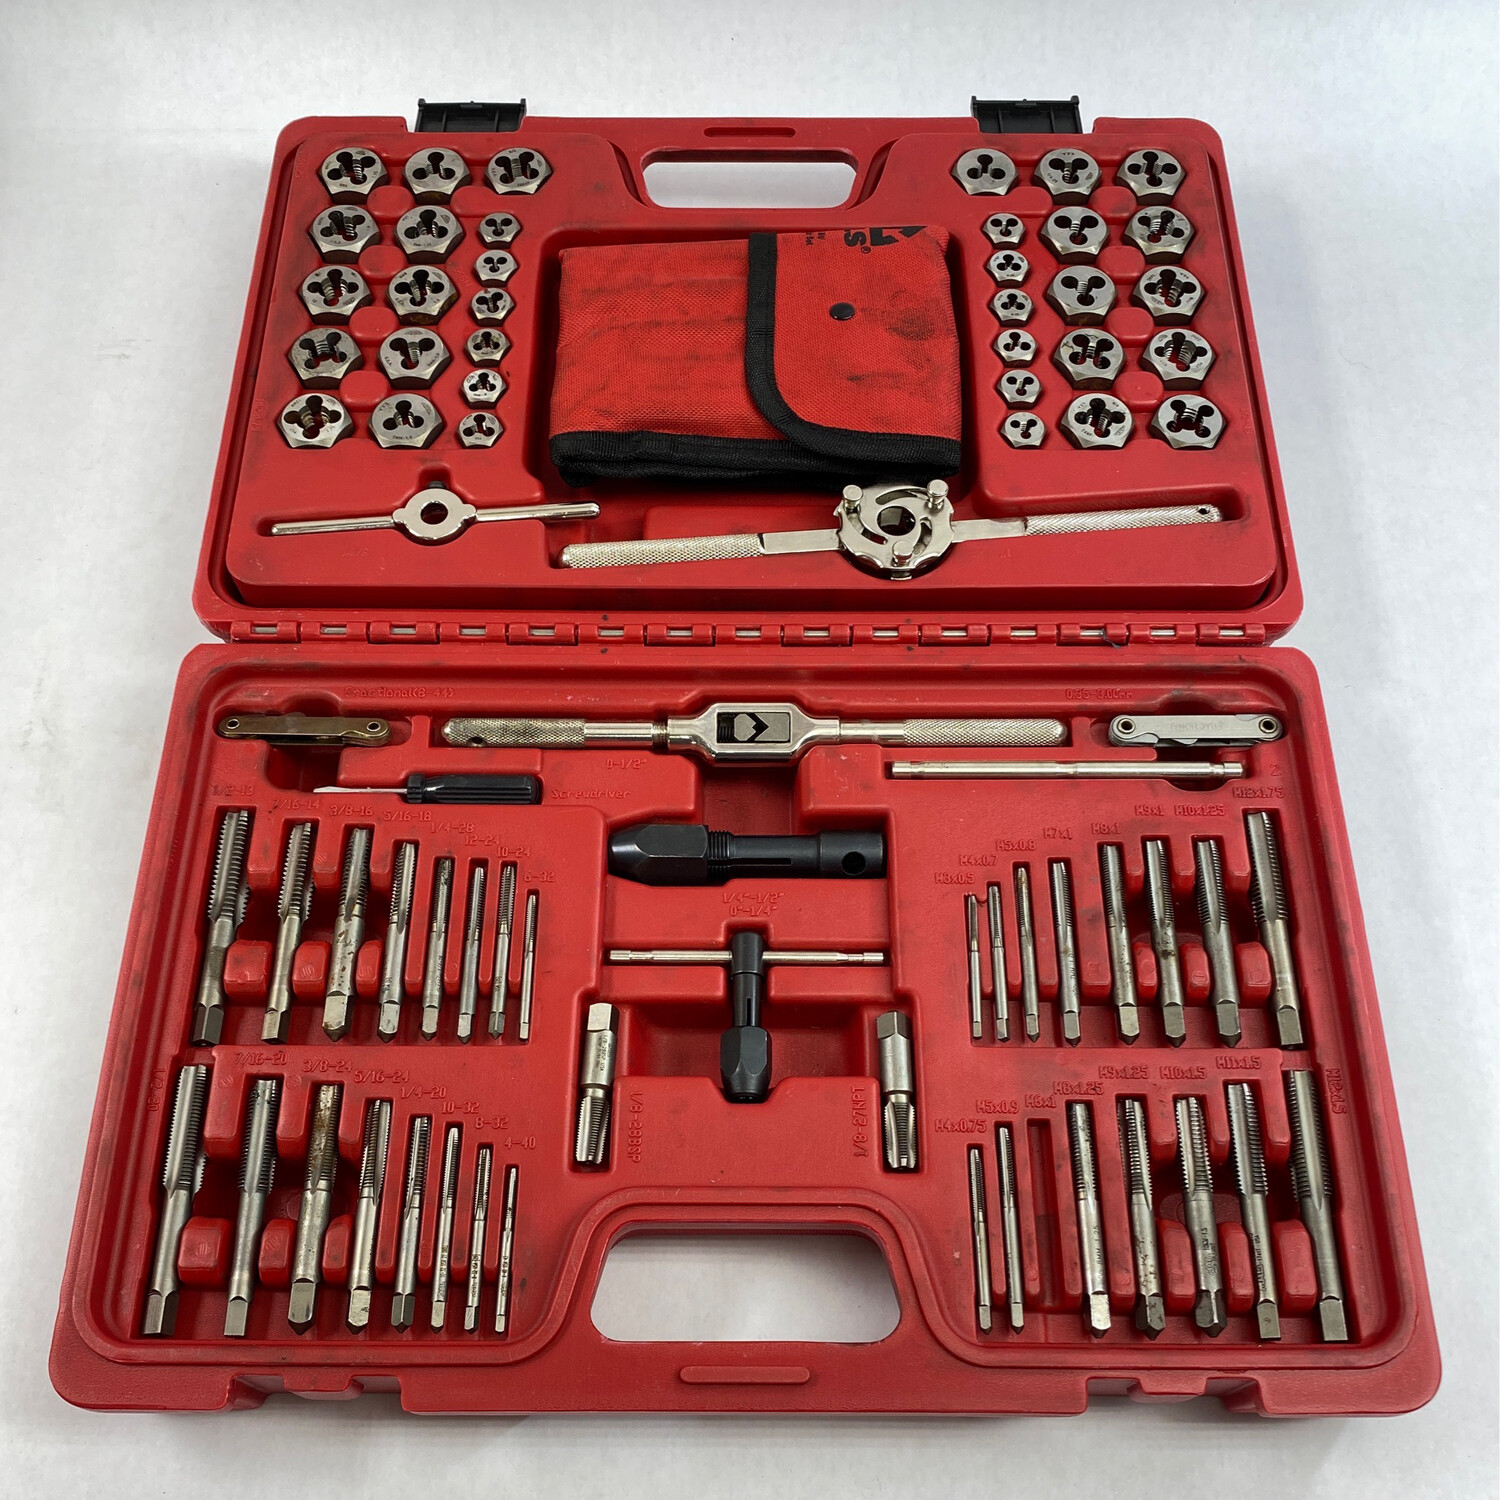 Mac Tools 117 Pc Tap and Die/Drill/Extractor Super Set, TD117COMBOS-US